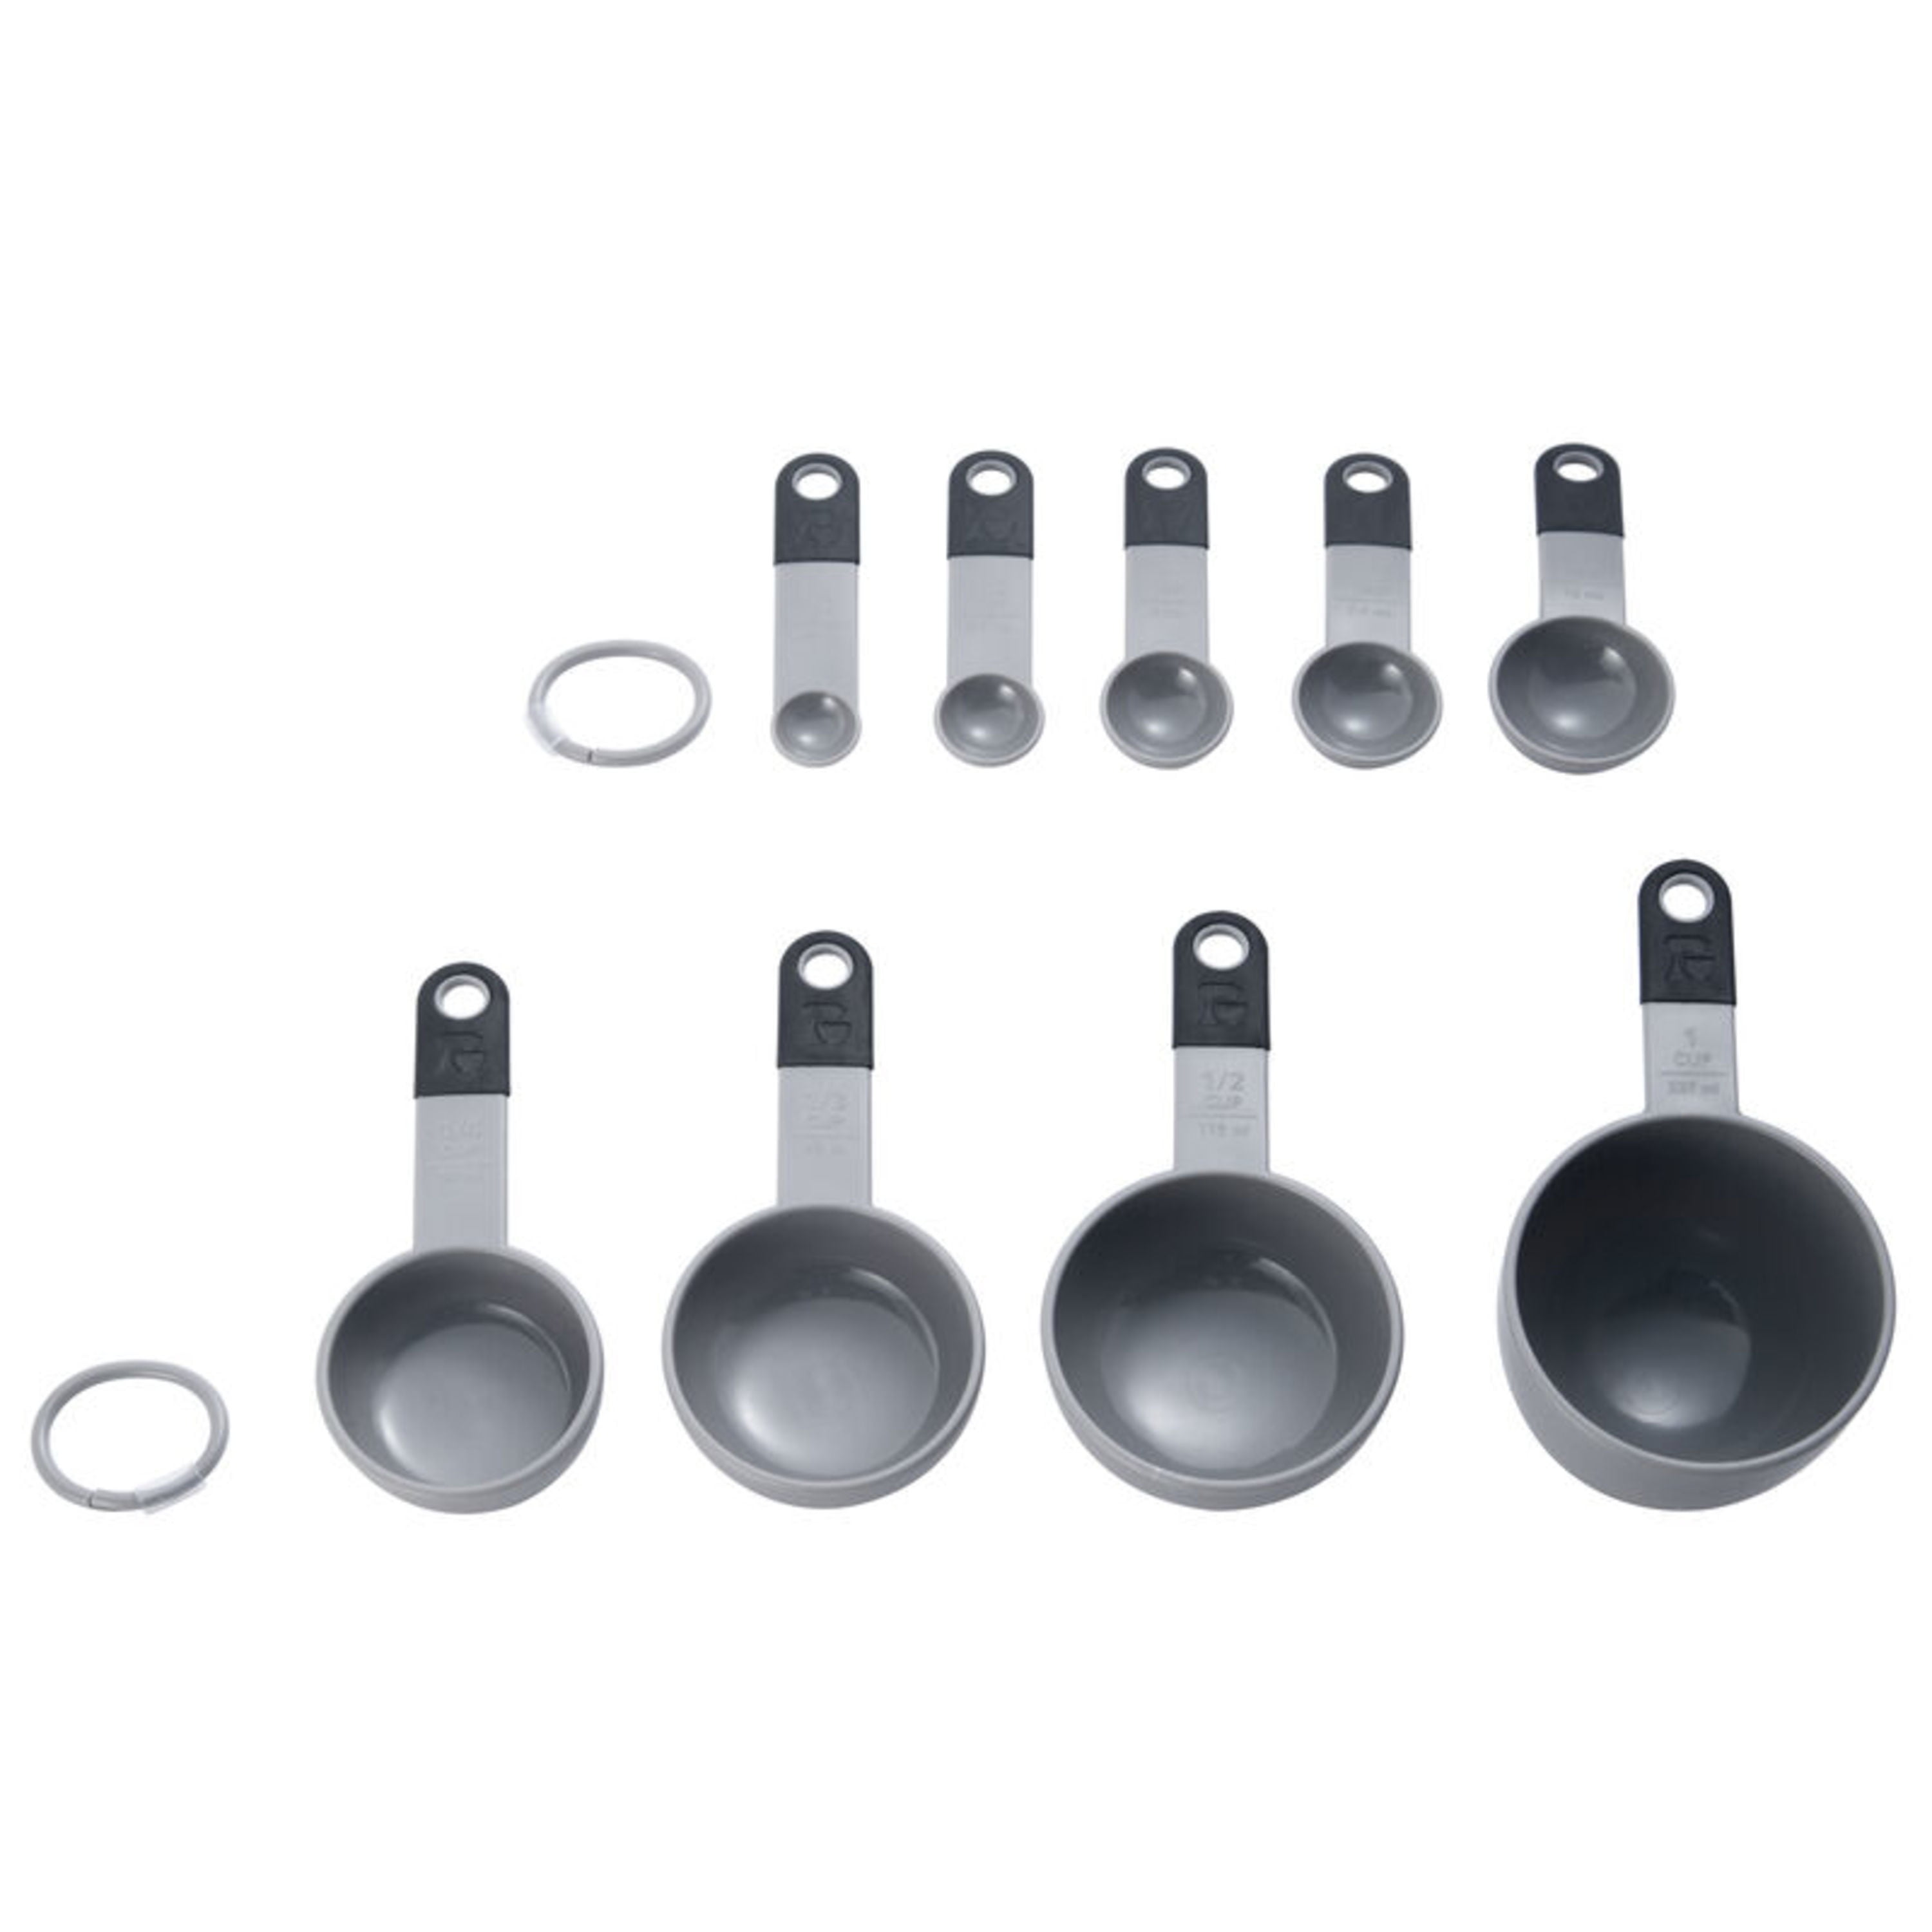 KAISHANE 9 Pieces Stainless Steel Measuring Cups and Spoons Set  Measurements, Heavy Duty for Baking and Cooking, Dishwasher Safe,Kitchen  Aid,Include